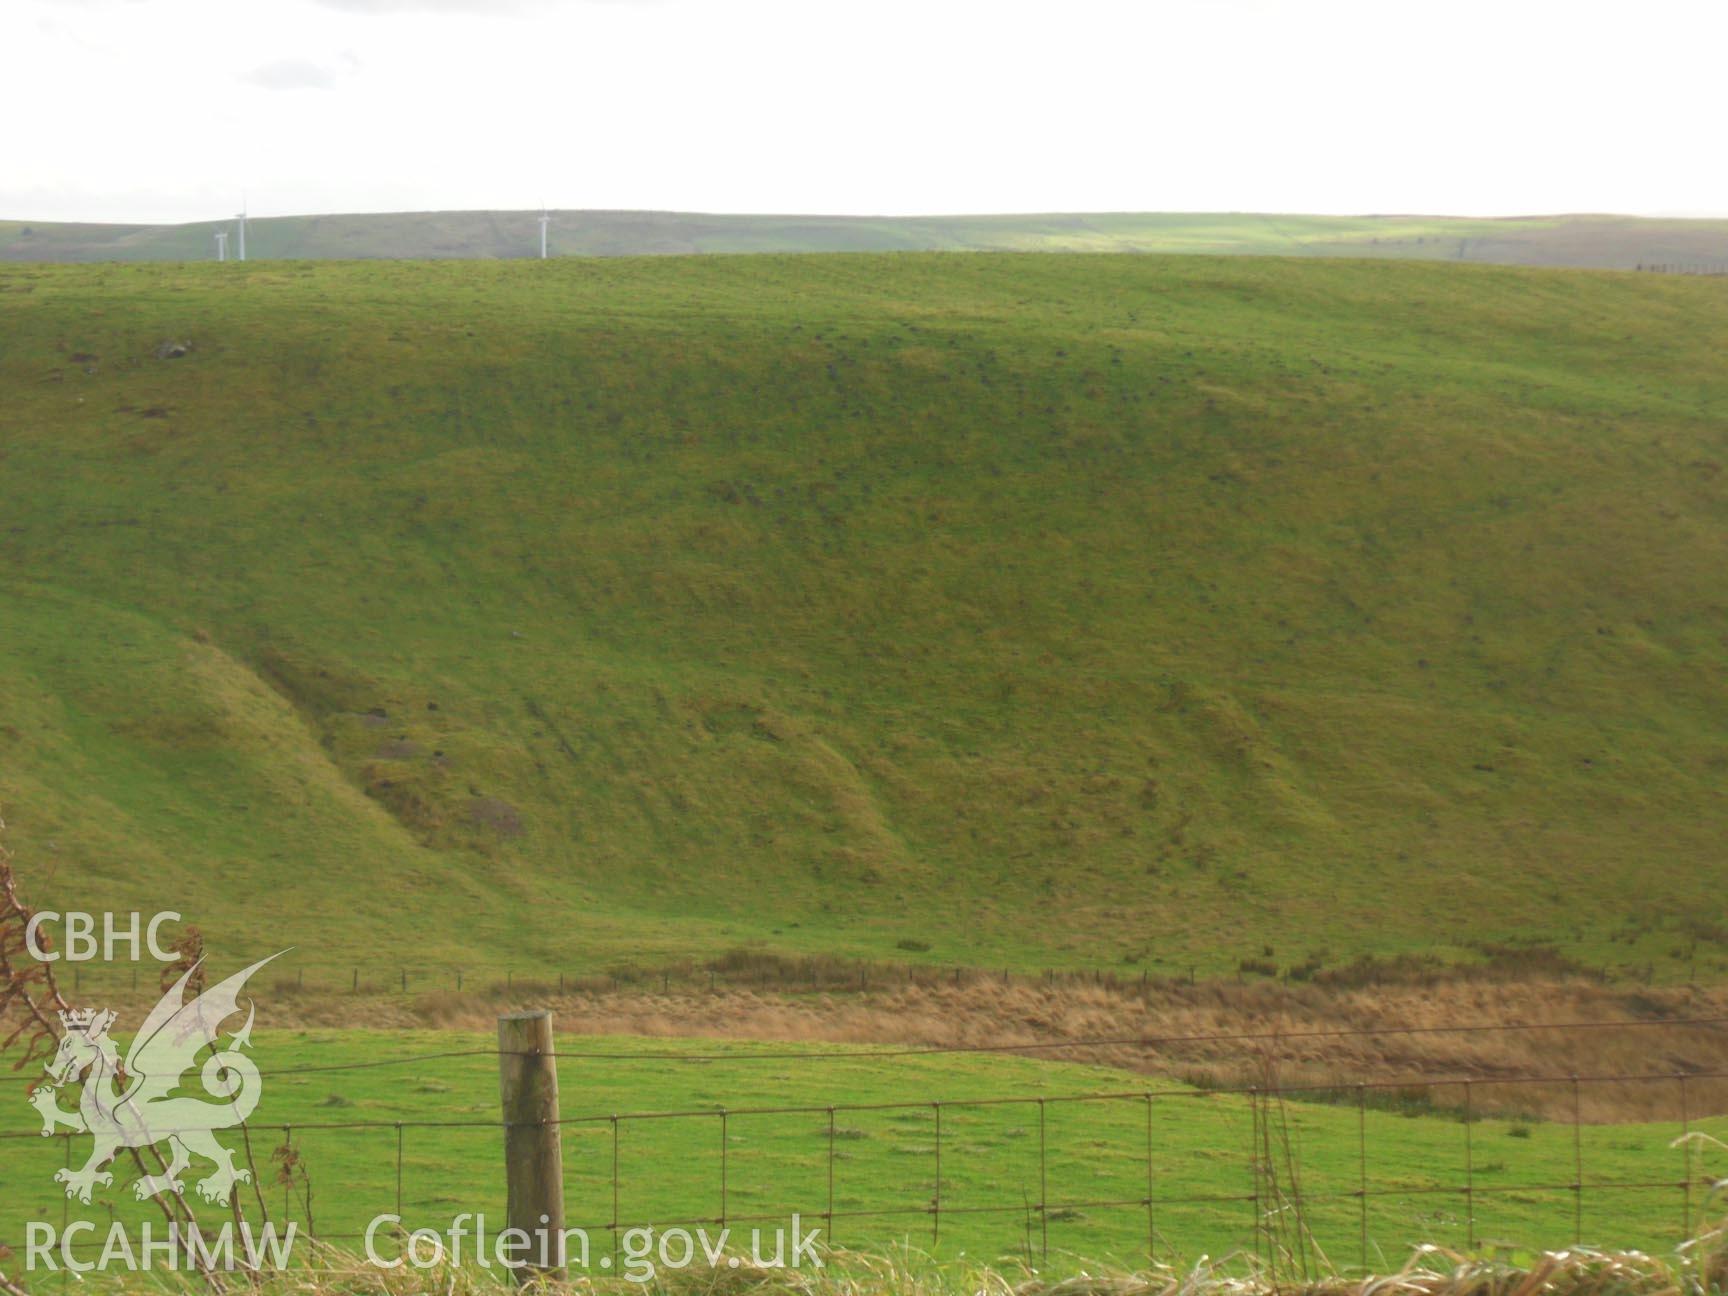 Digital colour photograph showing view south from northern extent of assessment area showing Pillow Mounds on north facing slope within assessment area, Tan y Foel Quarry, Cefn Coch, report no. 1089.